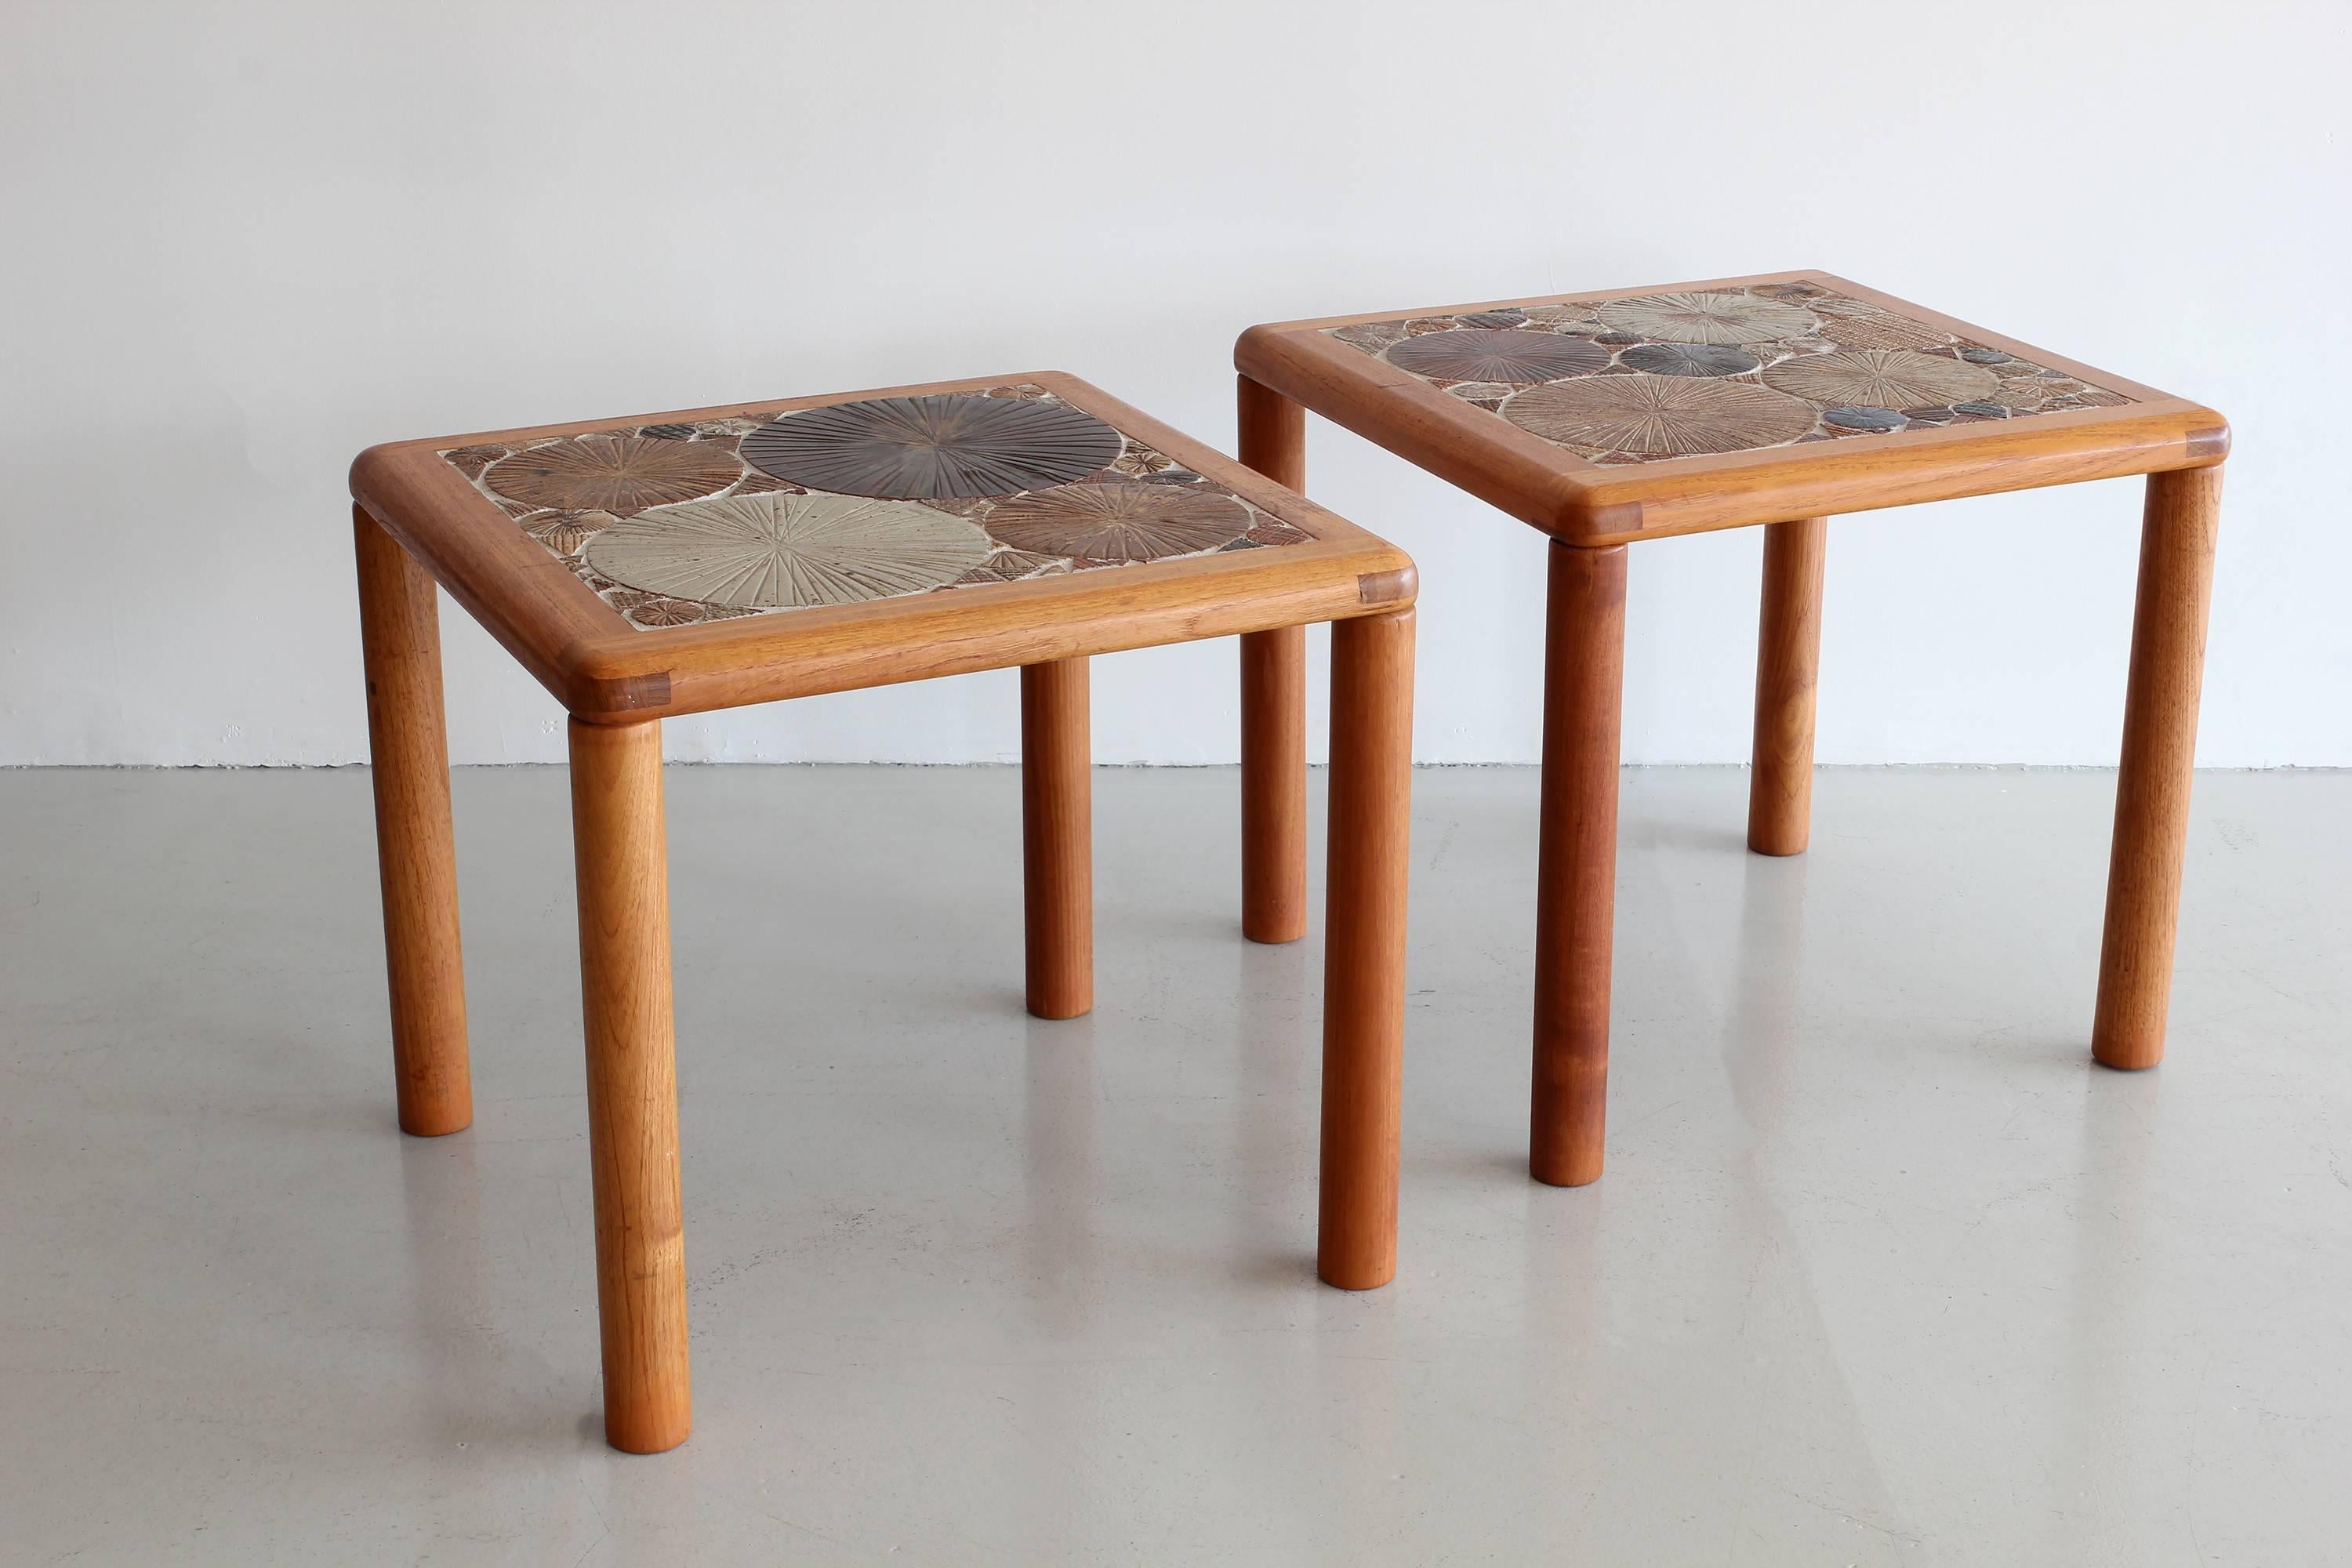 Fantastic pair of ceramic tile end tables beautiful crafted and signed by Danish Modern designer Tue Poulsen for Haslev Modern. 

Gorgeous textured tile, oak legs and frame, hand signed. 

Professionally oiled and waxed to retain original